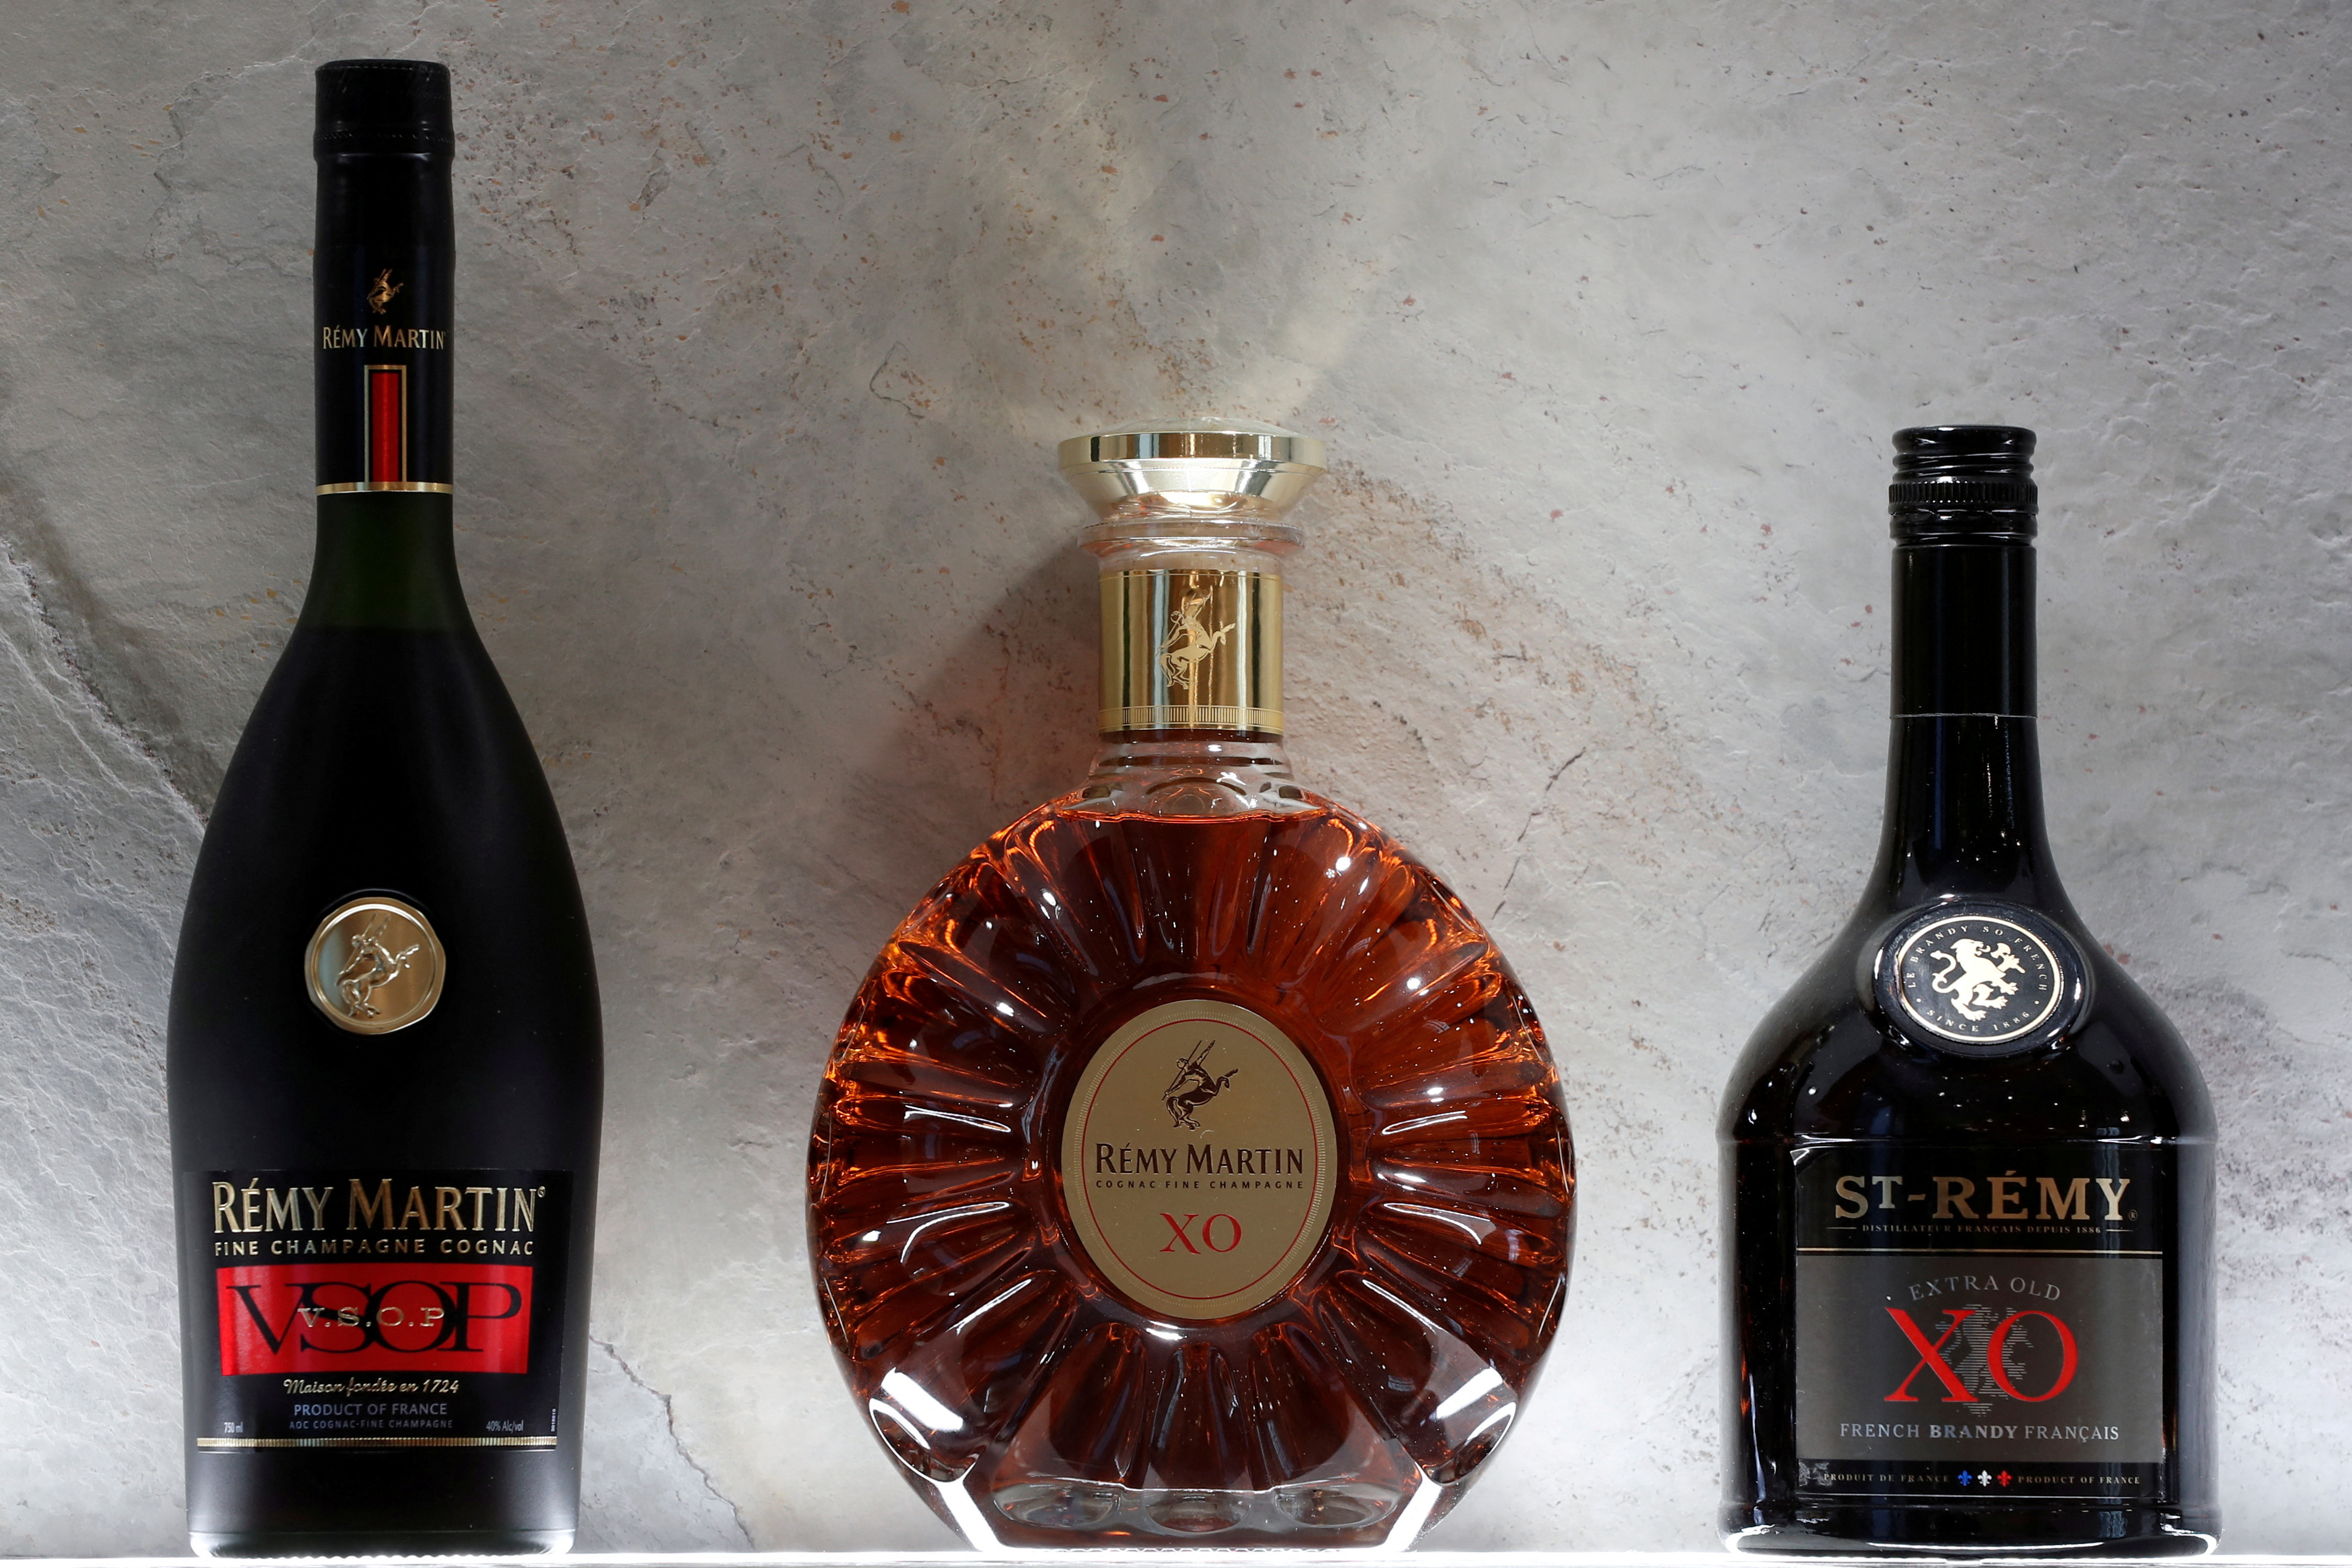 Bottles of Remy Martin VSOP cognac, Remy Martin XO cognac and St-Remy XO Brandy are displayed at the Remy Cointreau SA headquarters in Paris